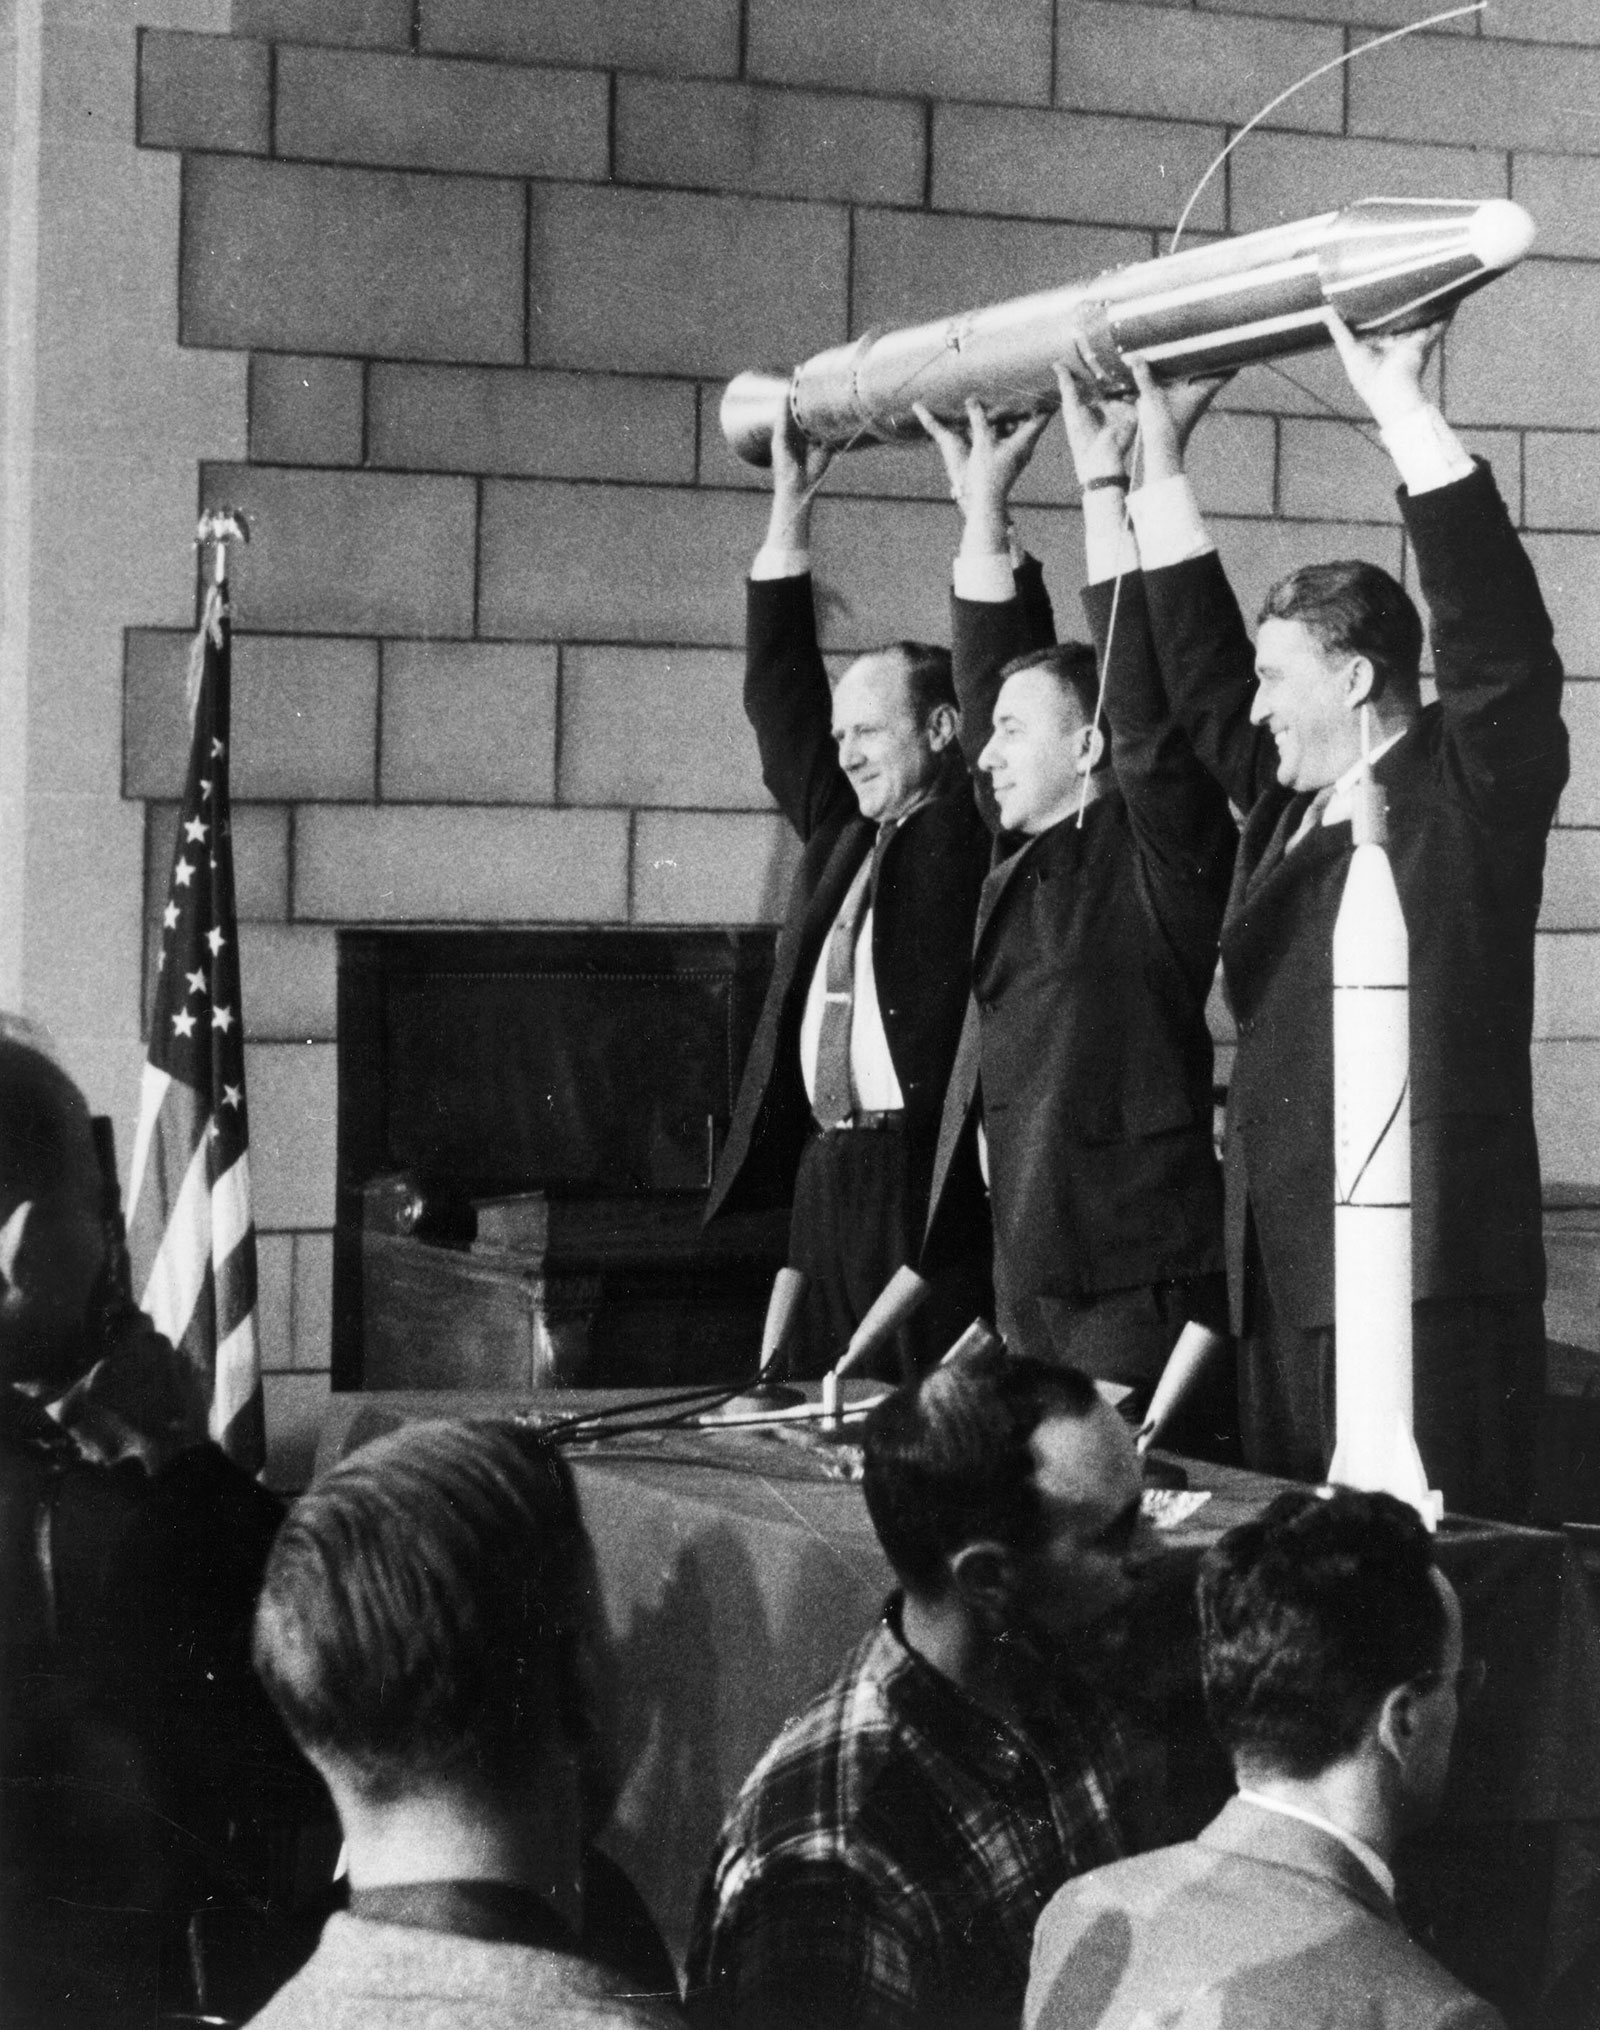 Three smiling men holding up a spacecraft model.